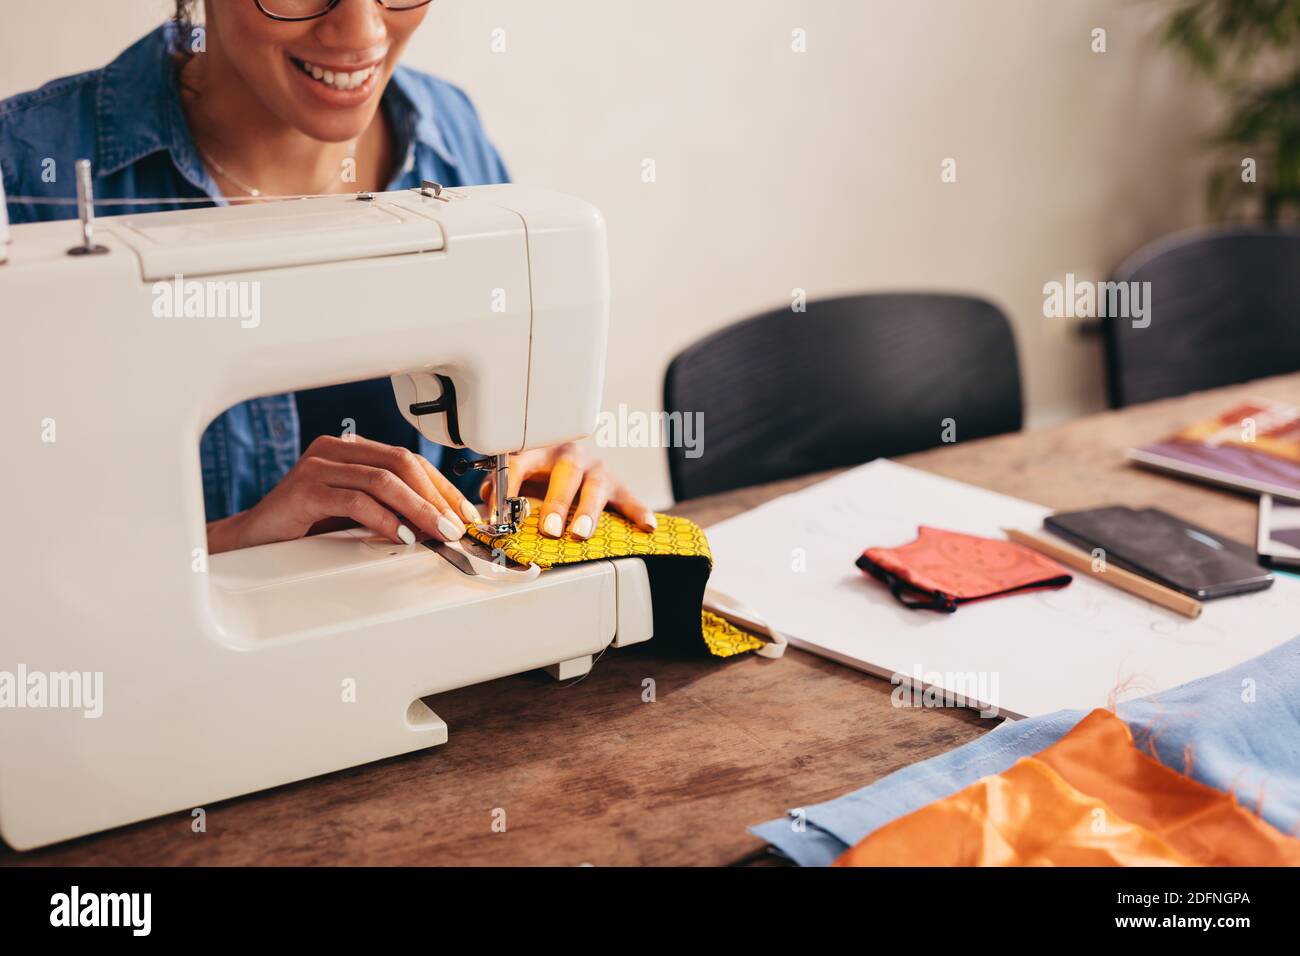 Woman hands sewing a face mask at home. Woman using the sewing machine to sew the face masks at home. Stock Photo